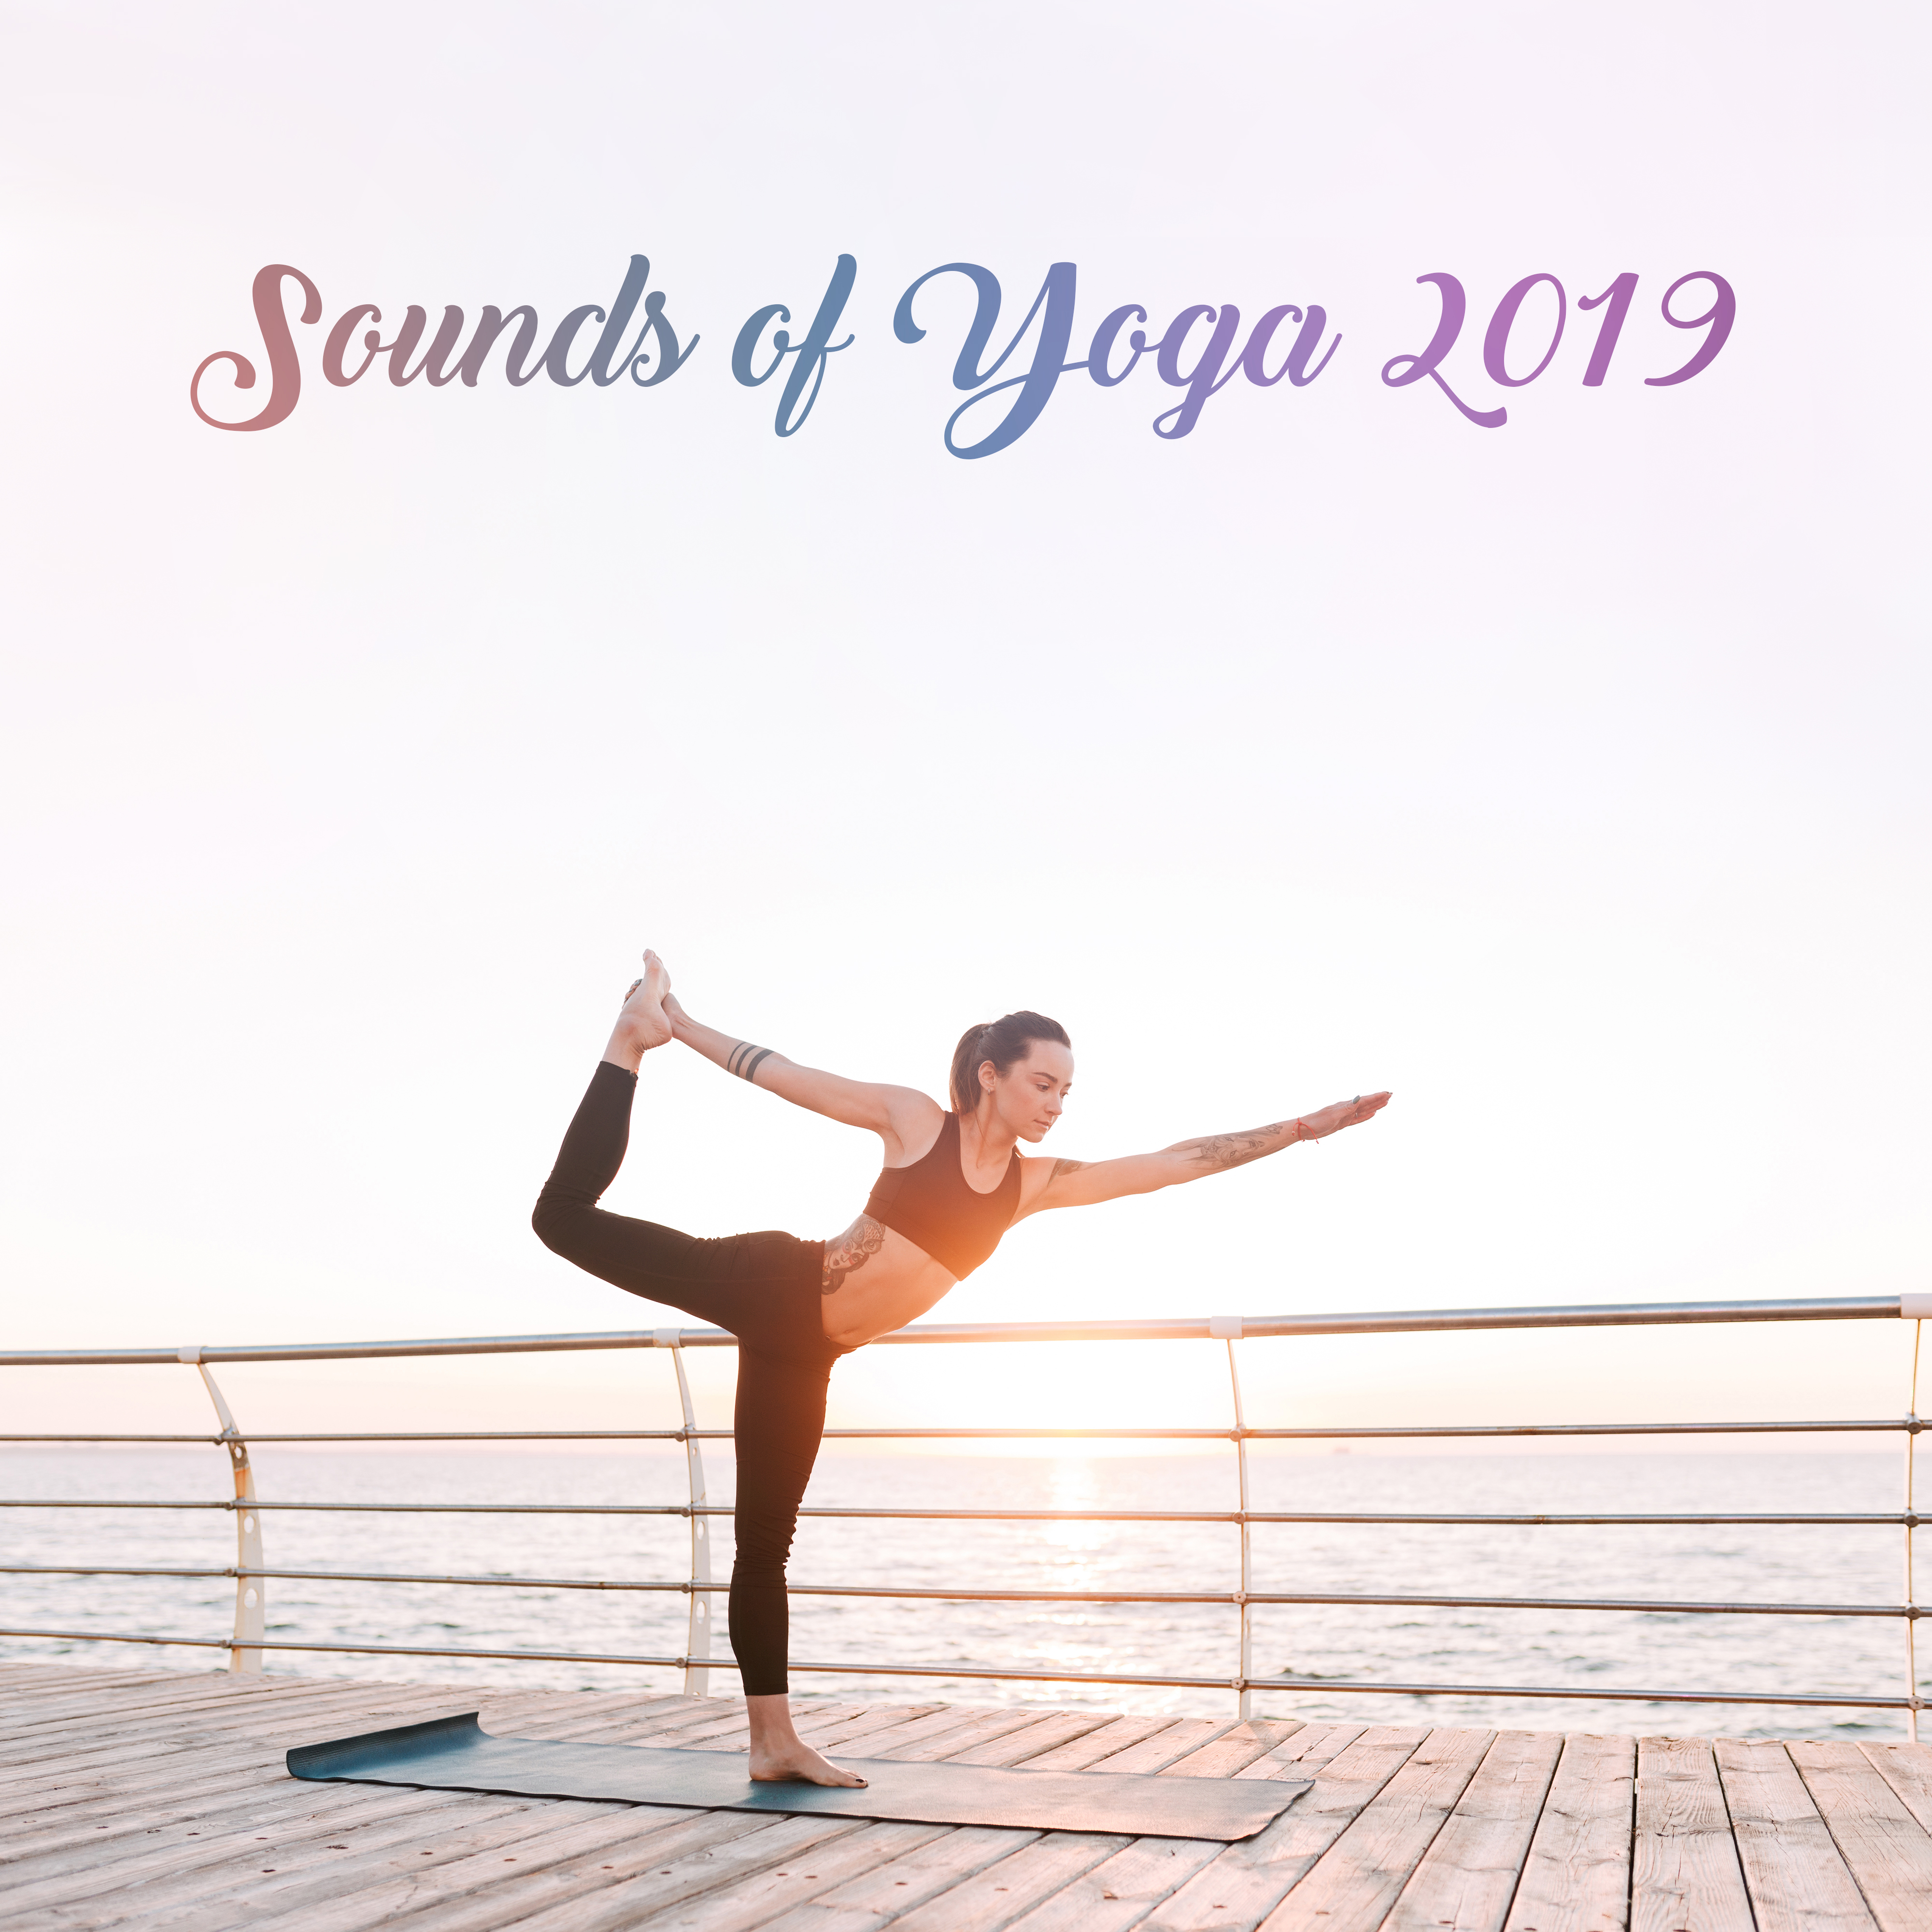 Sounds of Yoga 2019 – New Age Meditation & Relaxing Soft Music, Pure Harmony, Chakra Healing